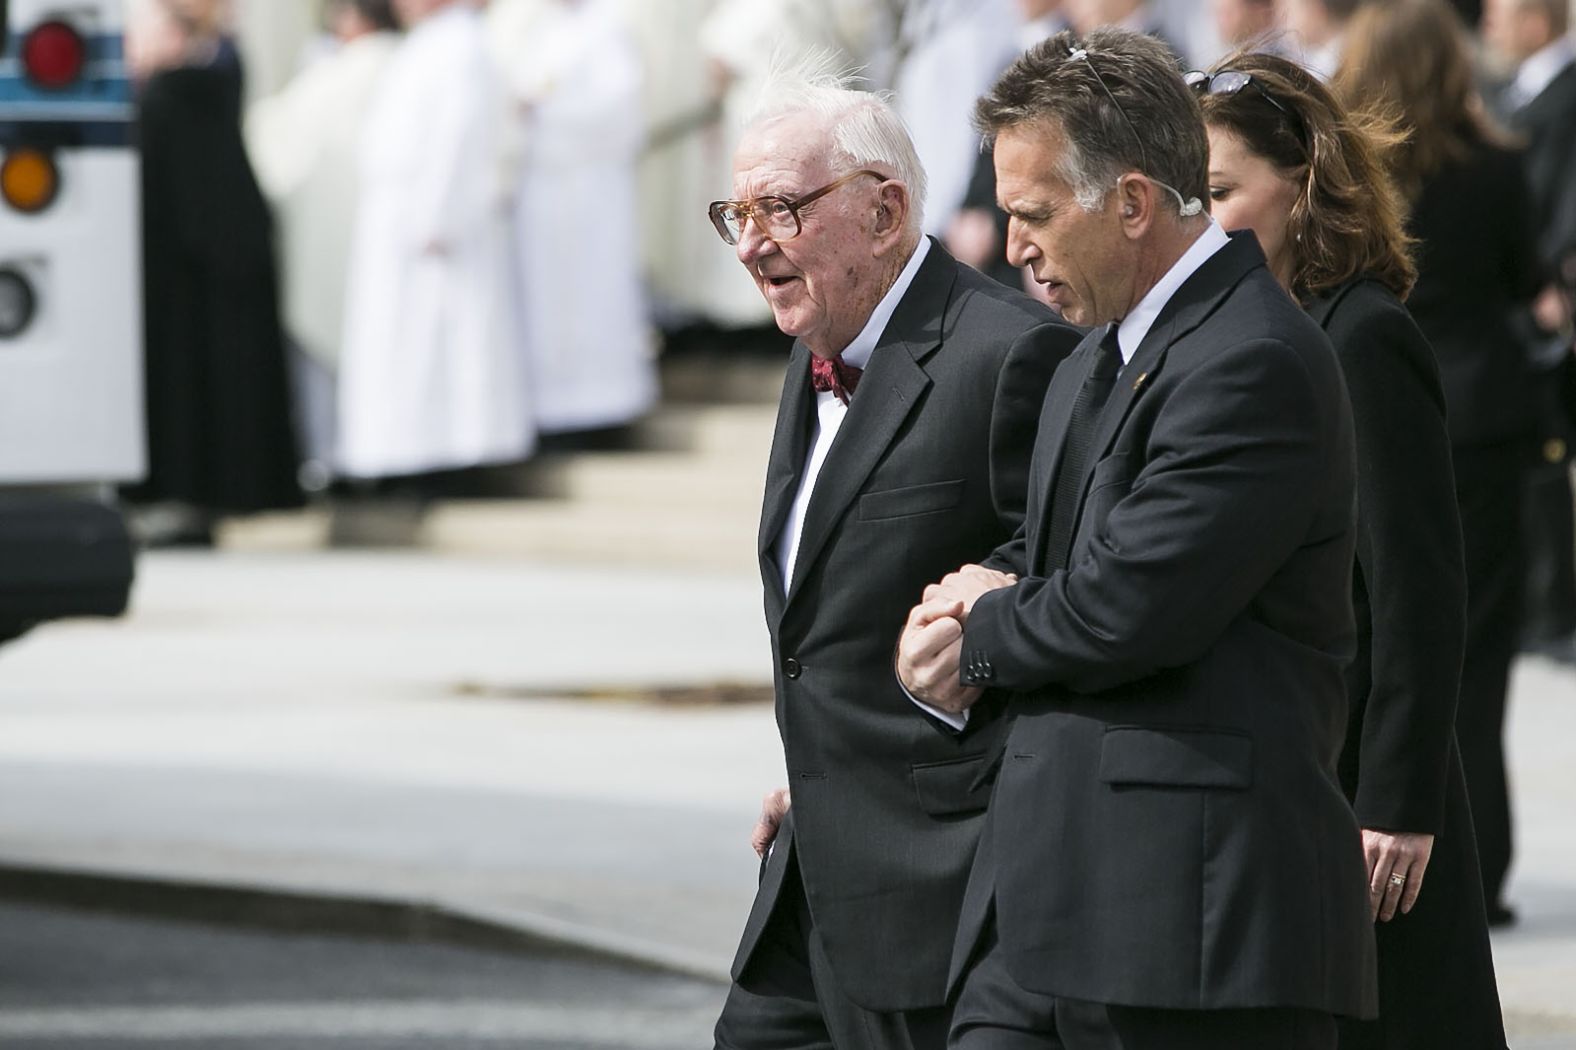 Stevens departs from the funeral for fellow Justice Antonin Scalia at the Basilica of the National Shrine of the Immaculate Conception in Washington on February 20, 2016.